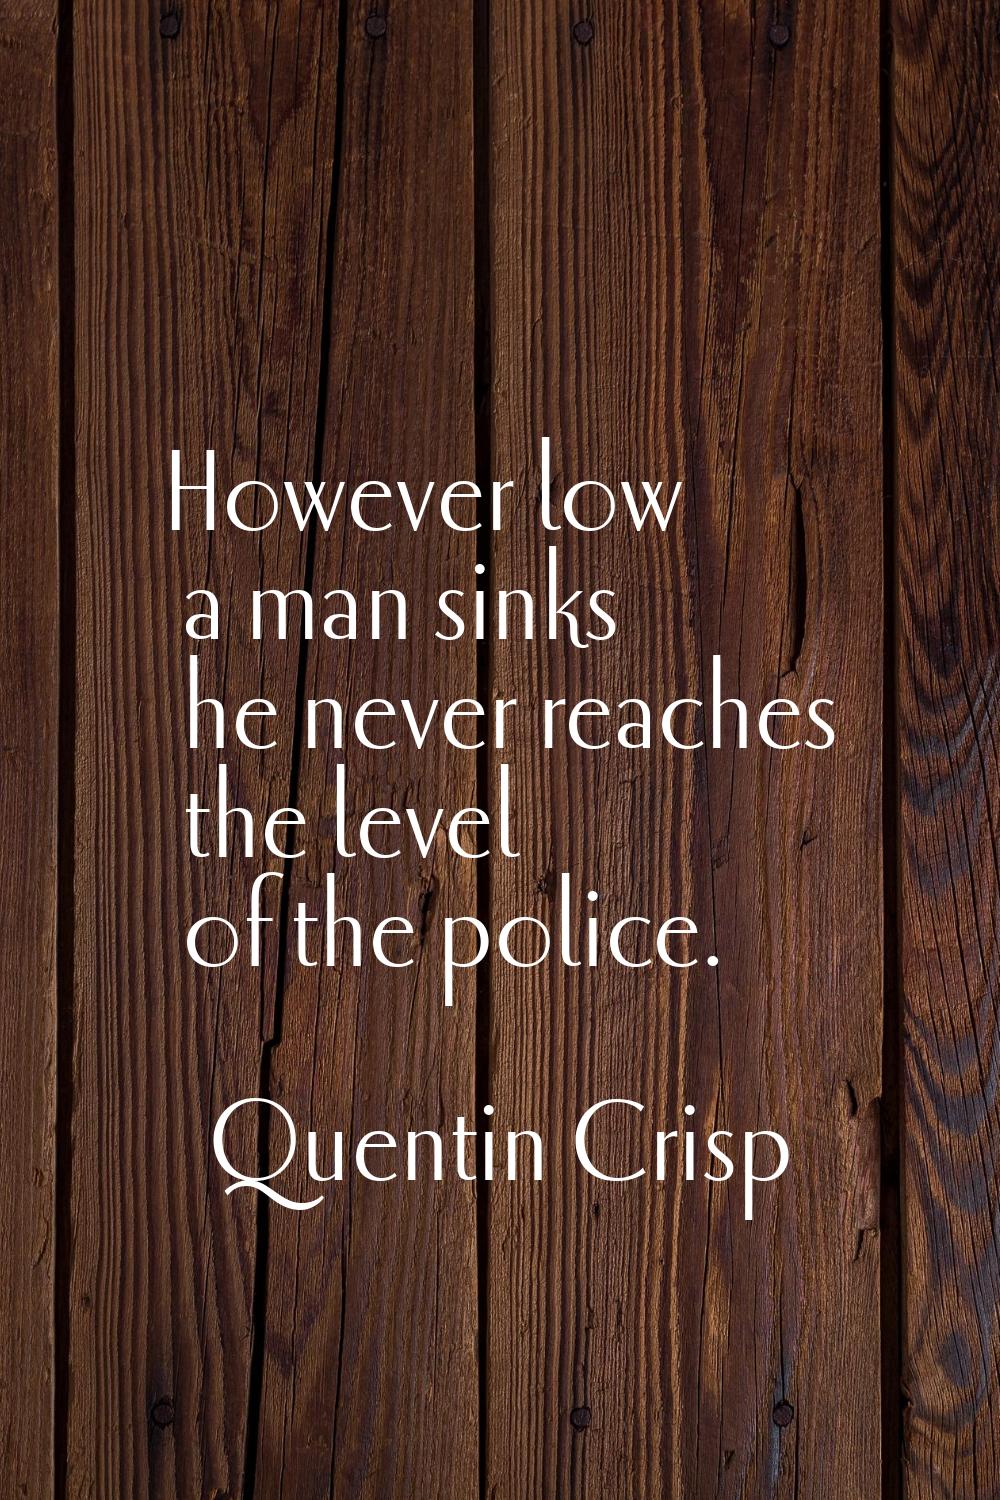 However low a man sinks he never reaches the level of the police.